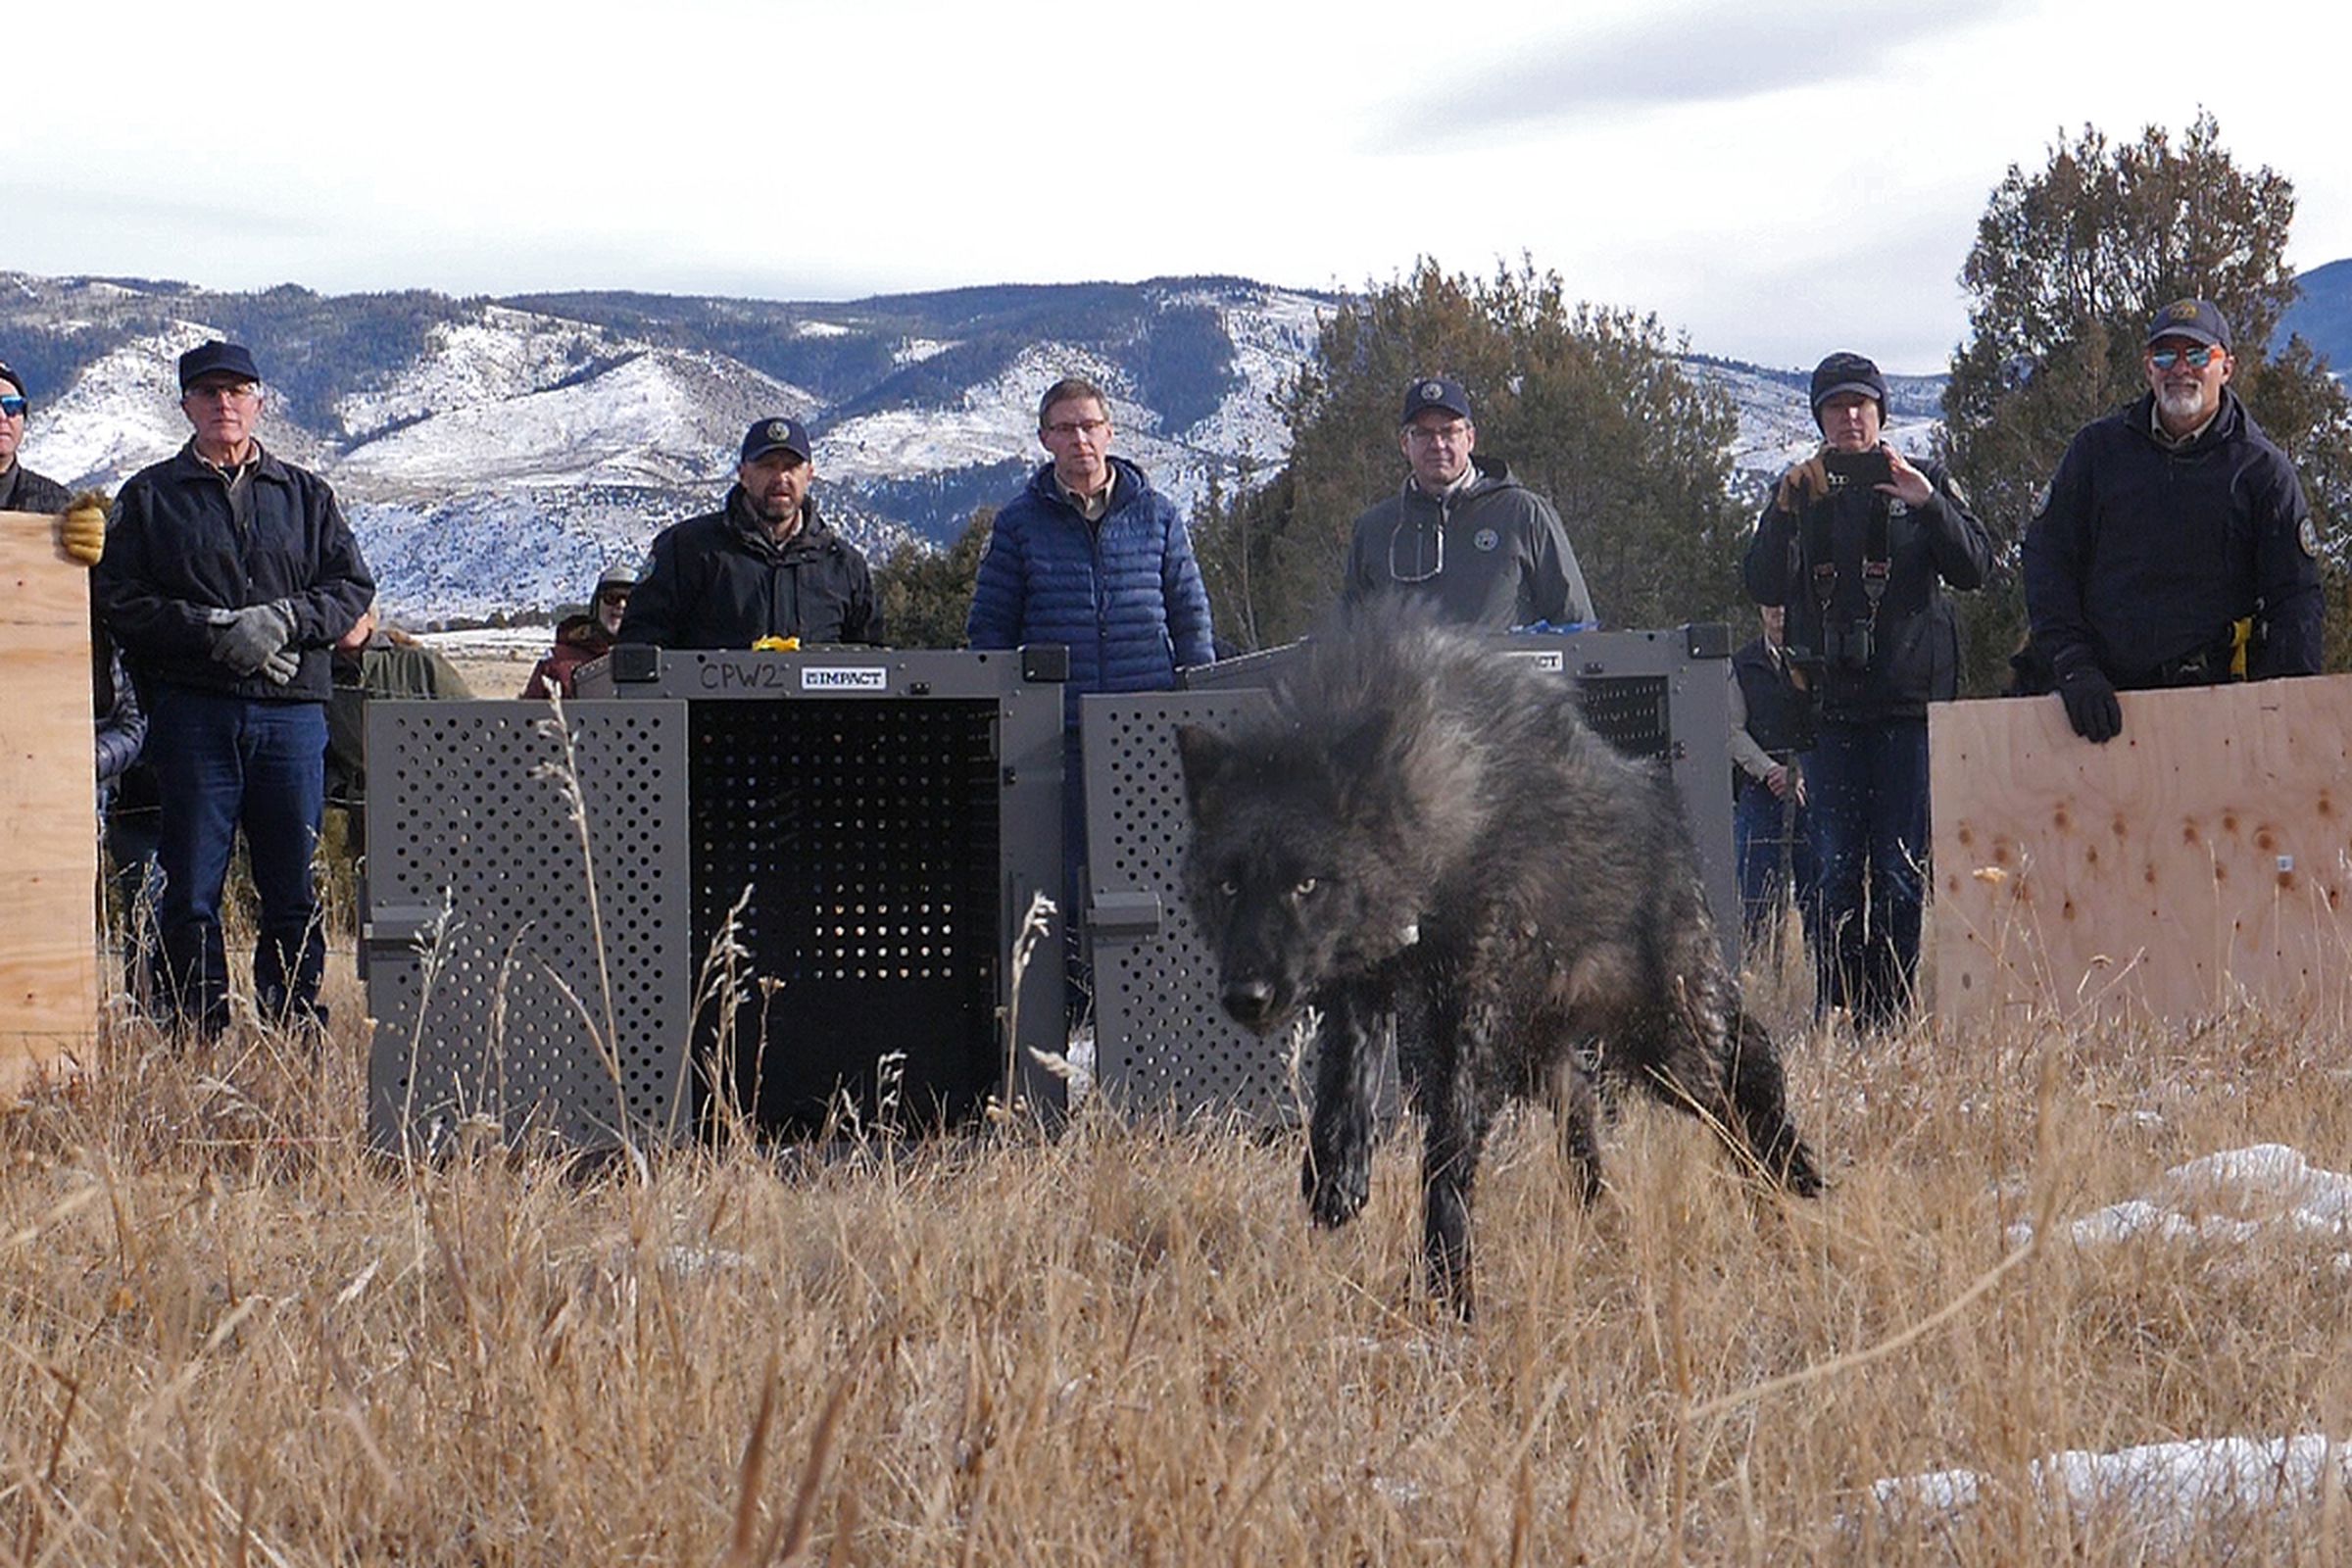 A black wolf runs out of a crate with a line of people standing behind it.